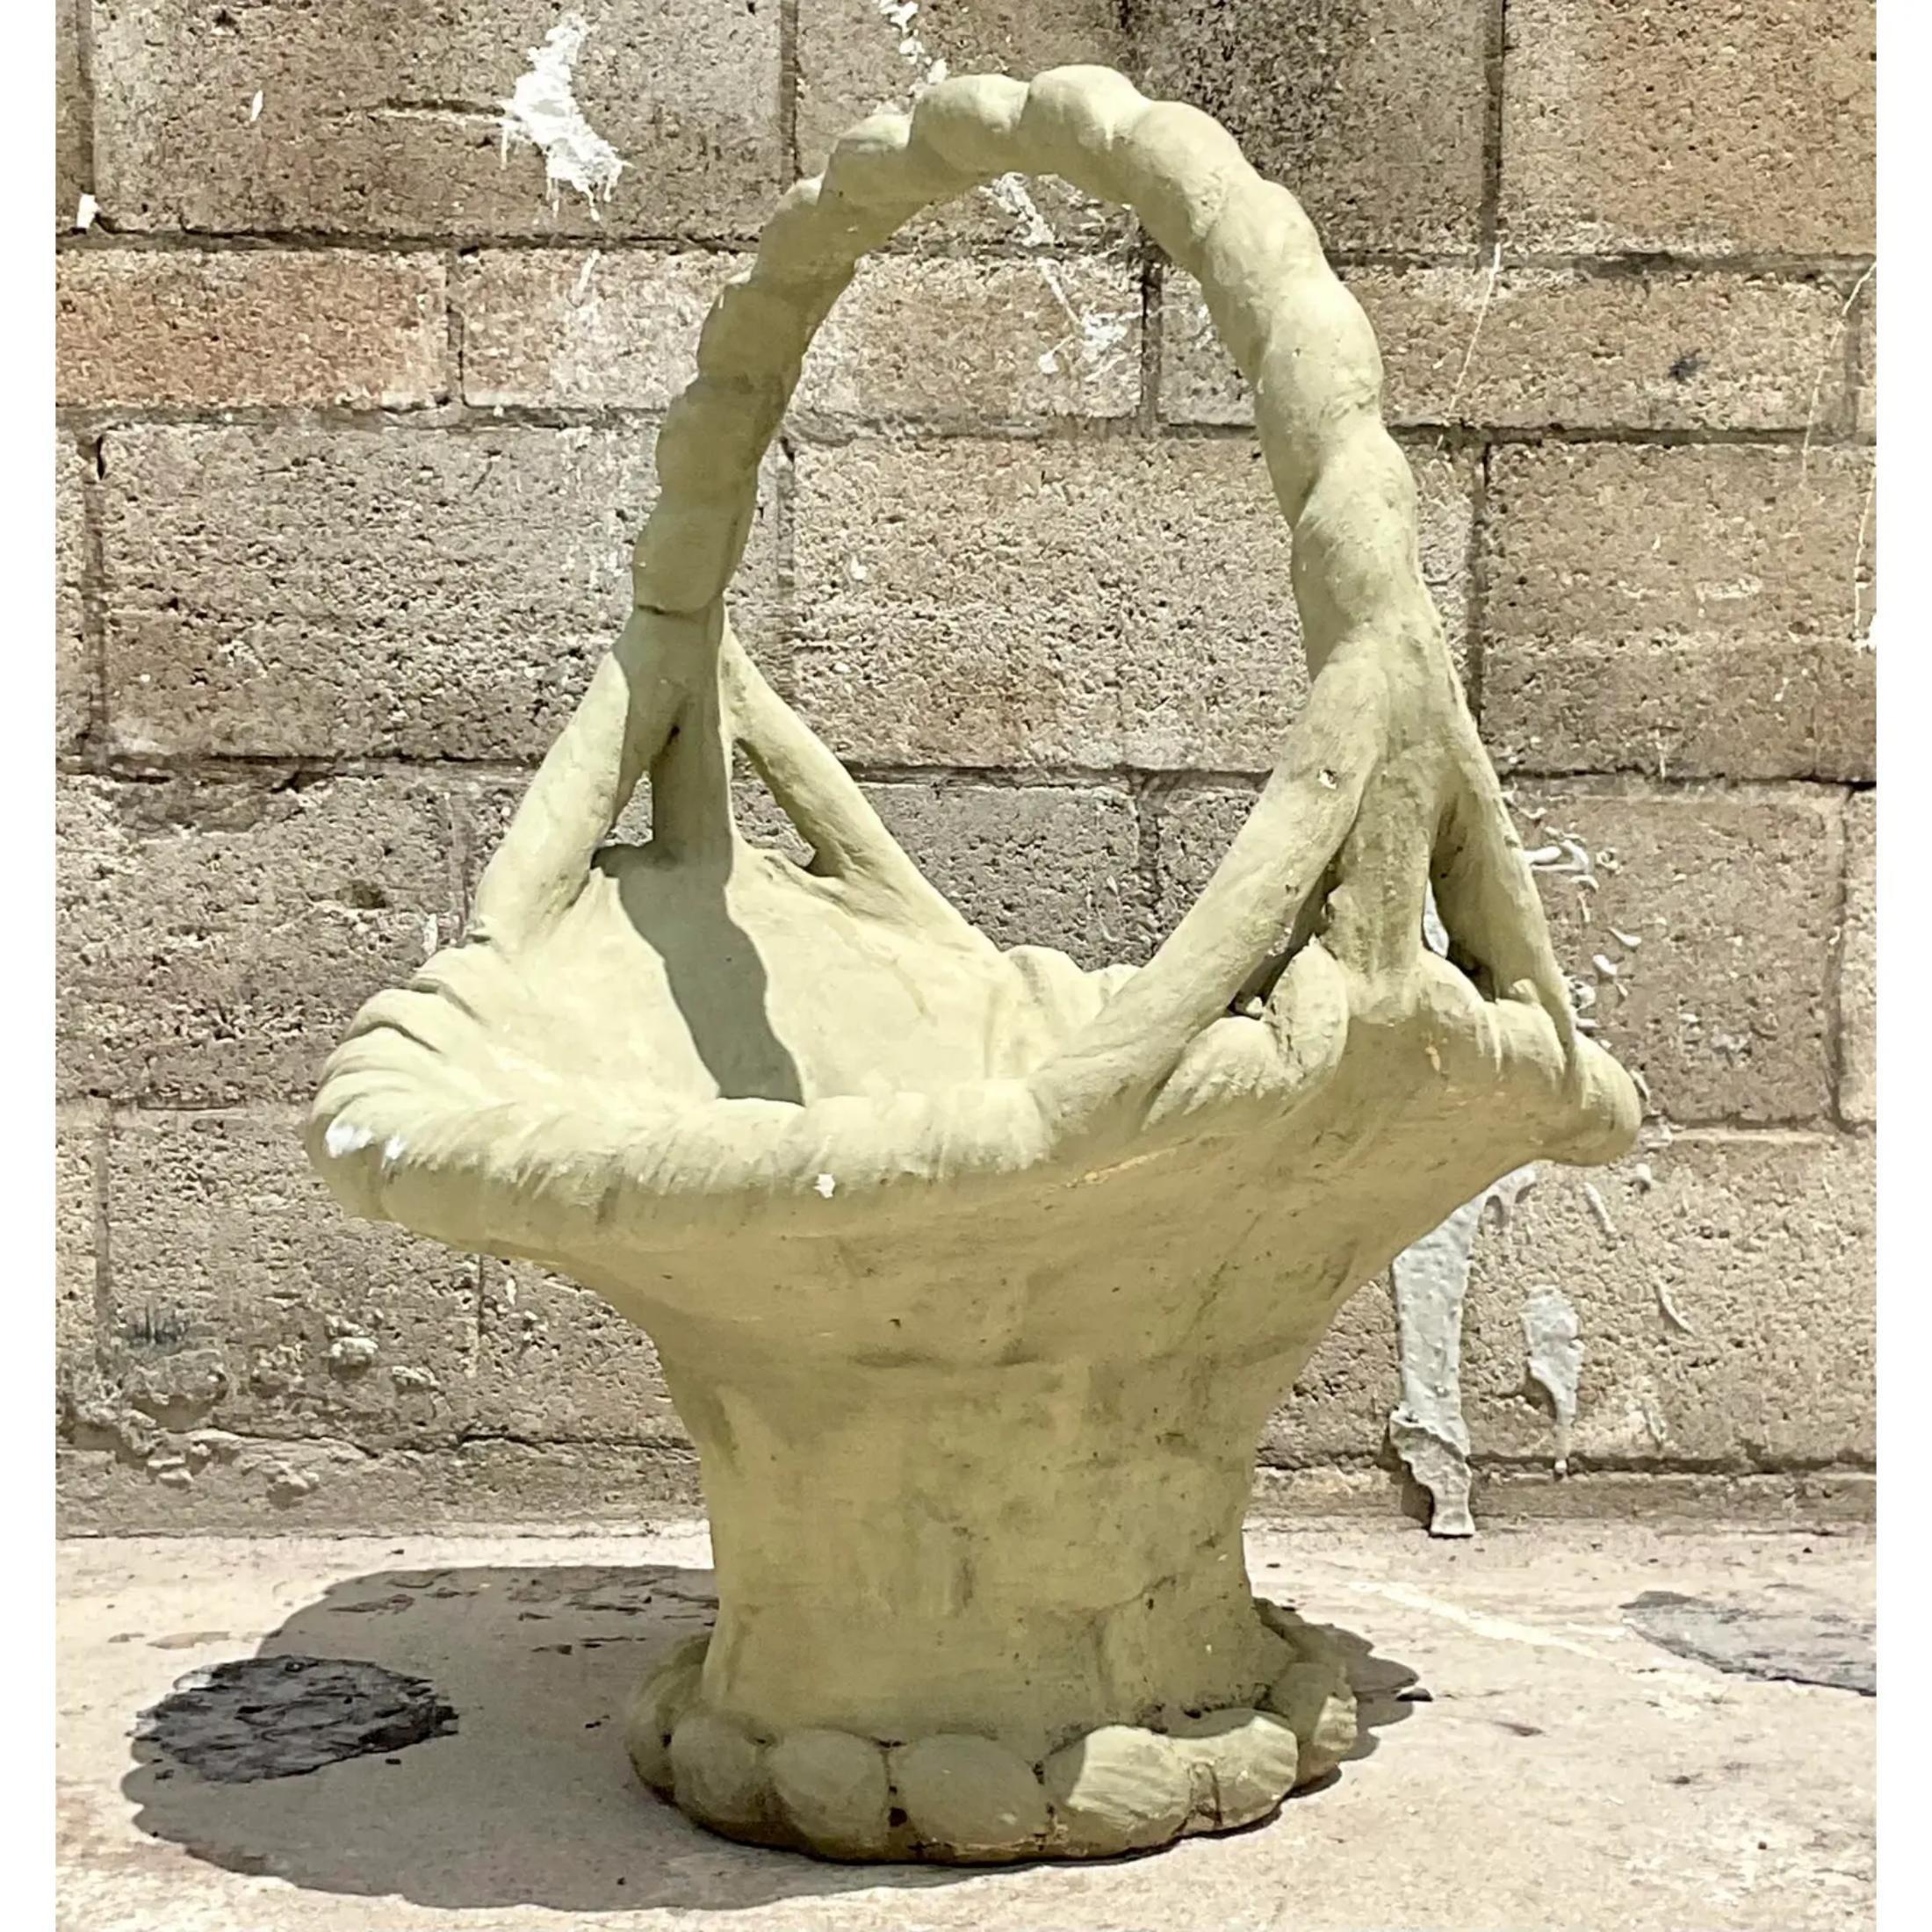 Fabulous vintage Cast cement planter. A monumental garden basket that is the most charming planter. Thr huge size is sure to add a little flash of whimsy to any space. Acquired from a Palm Beach estate.